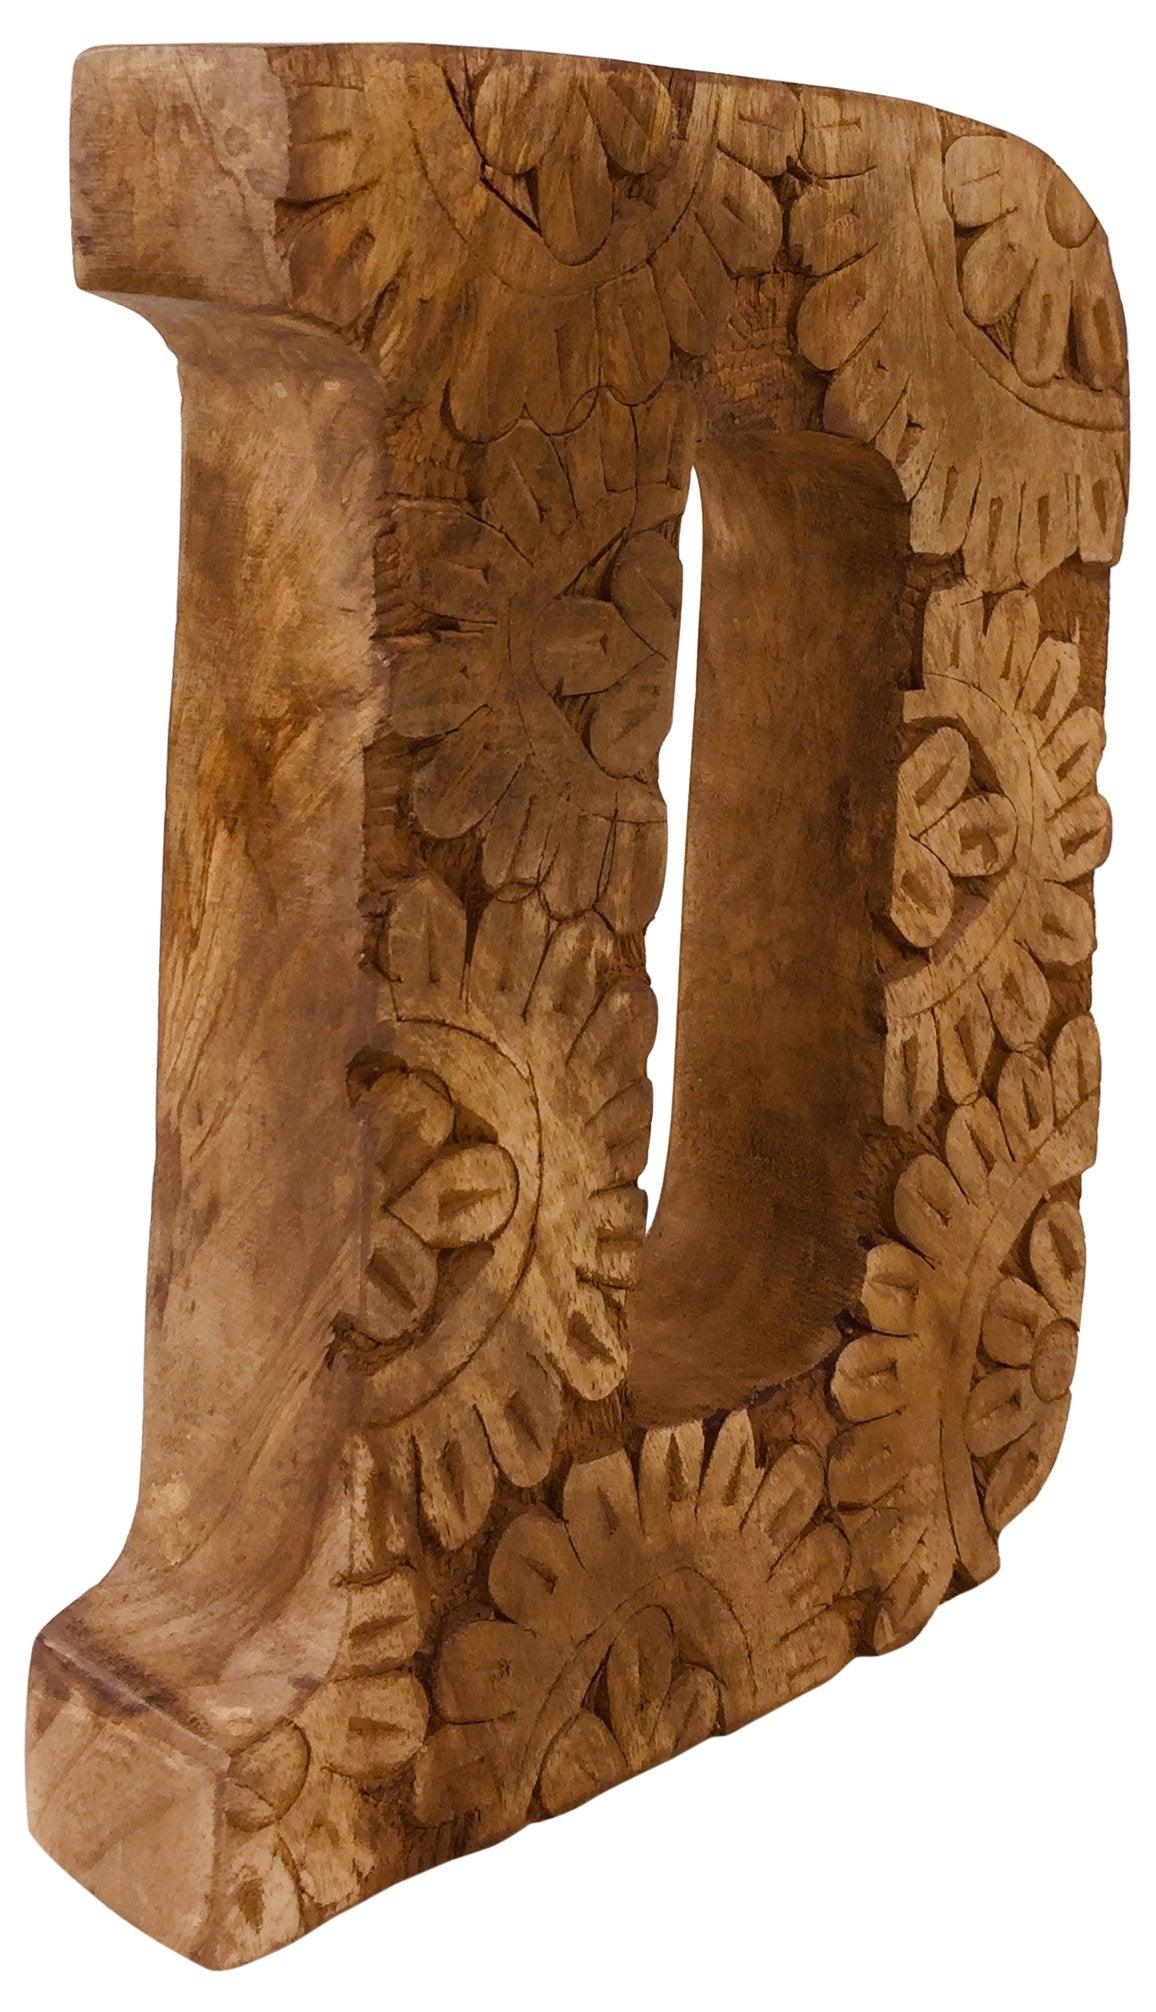 View Hand Carved Wooden Flower Letter D information